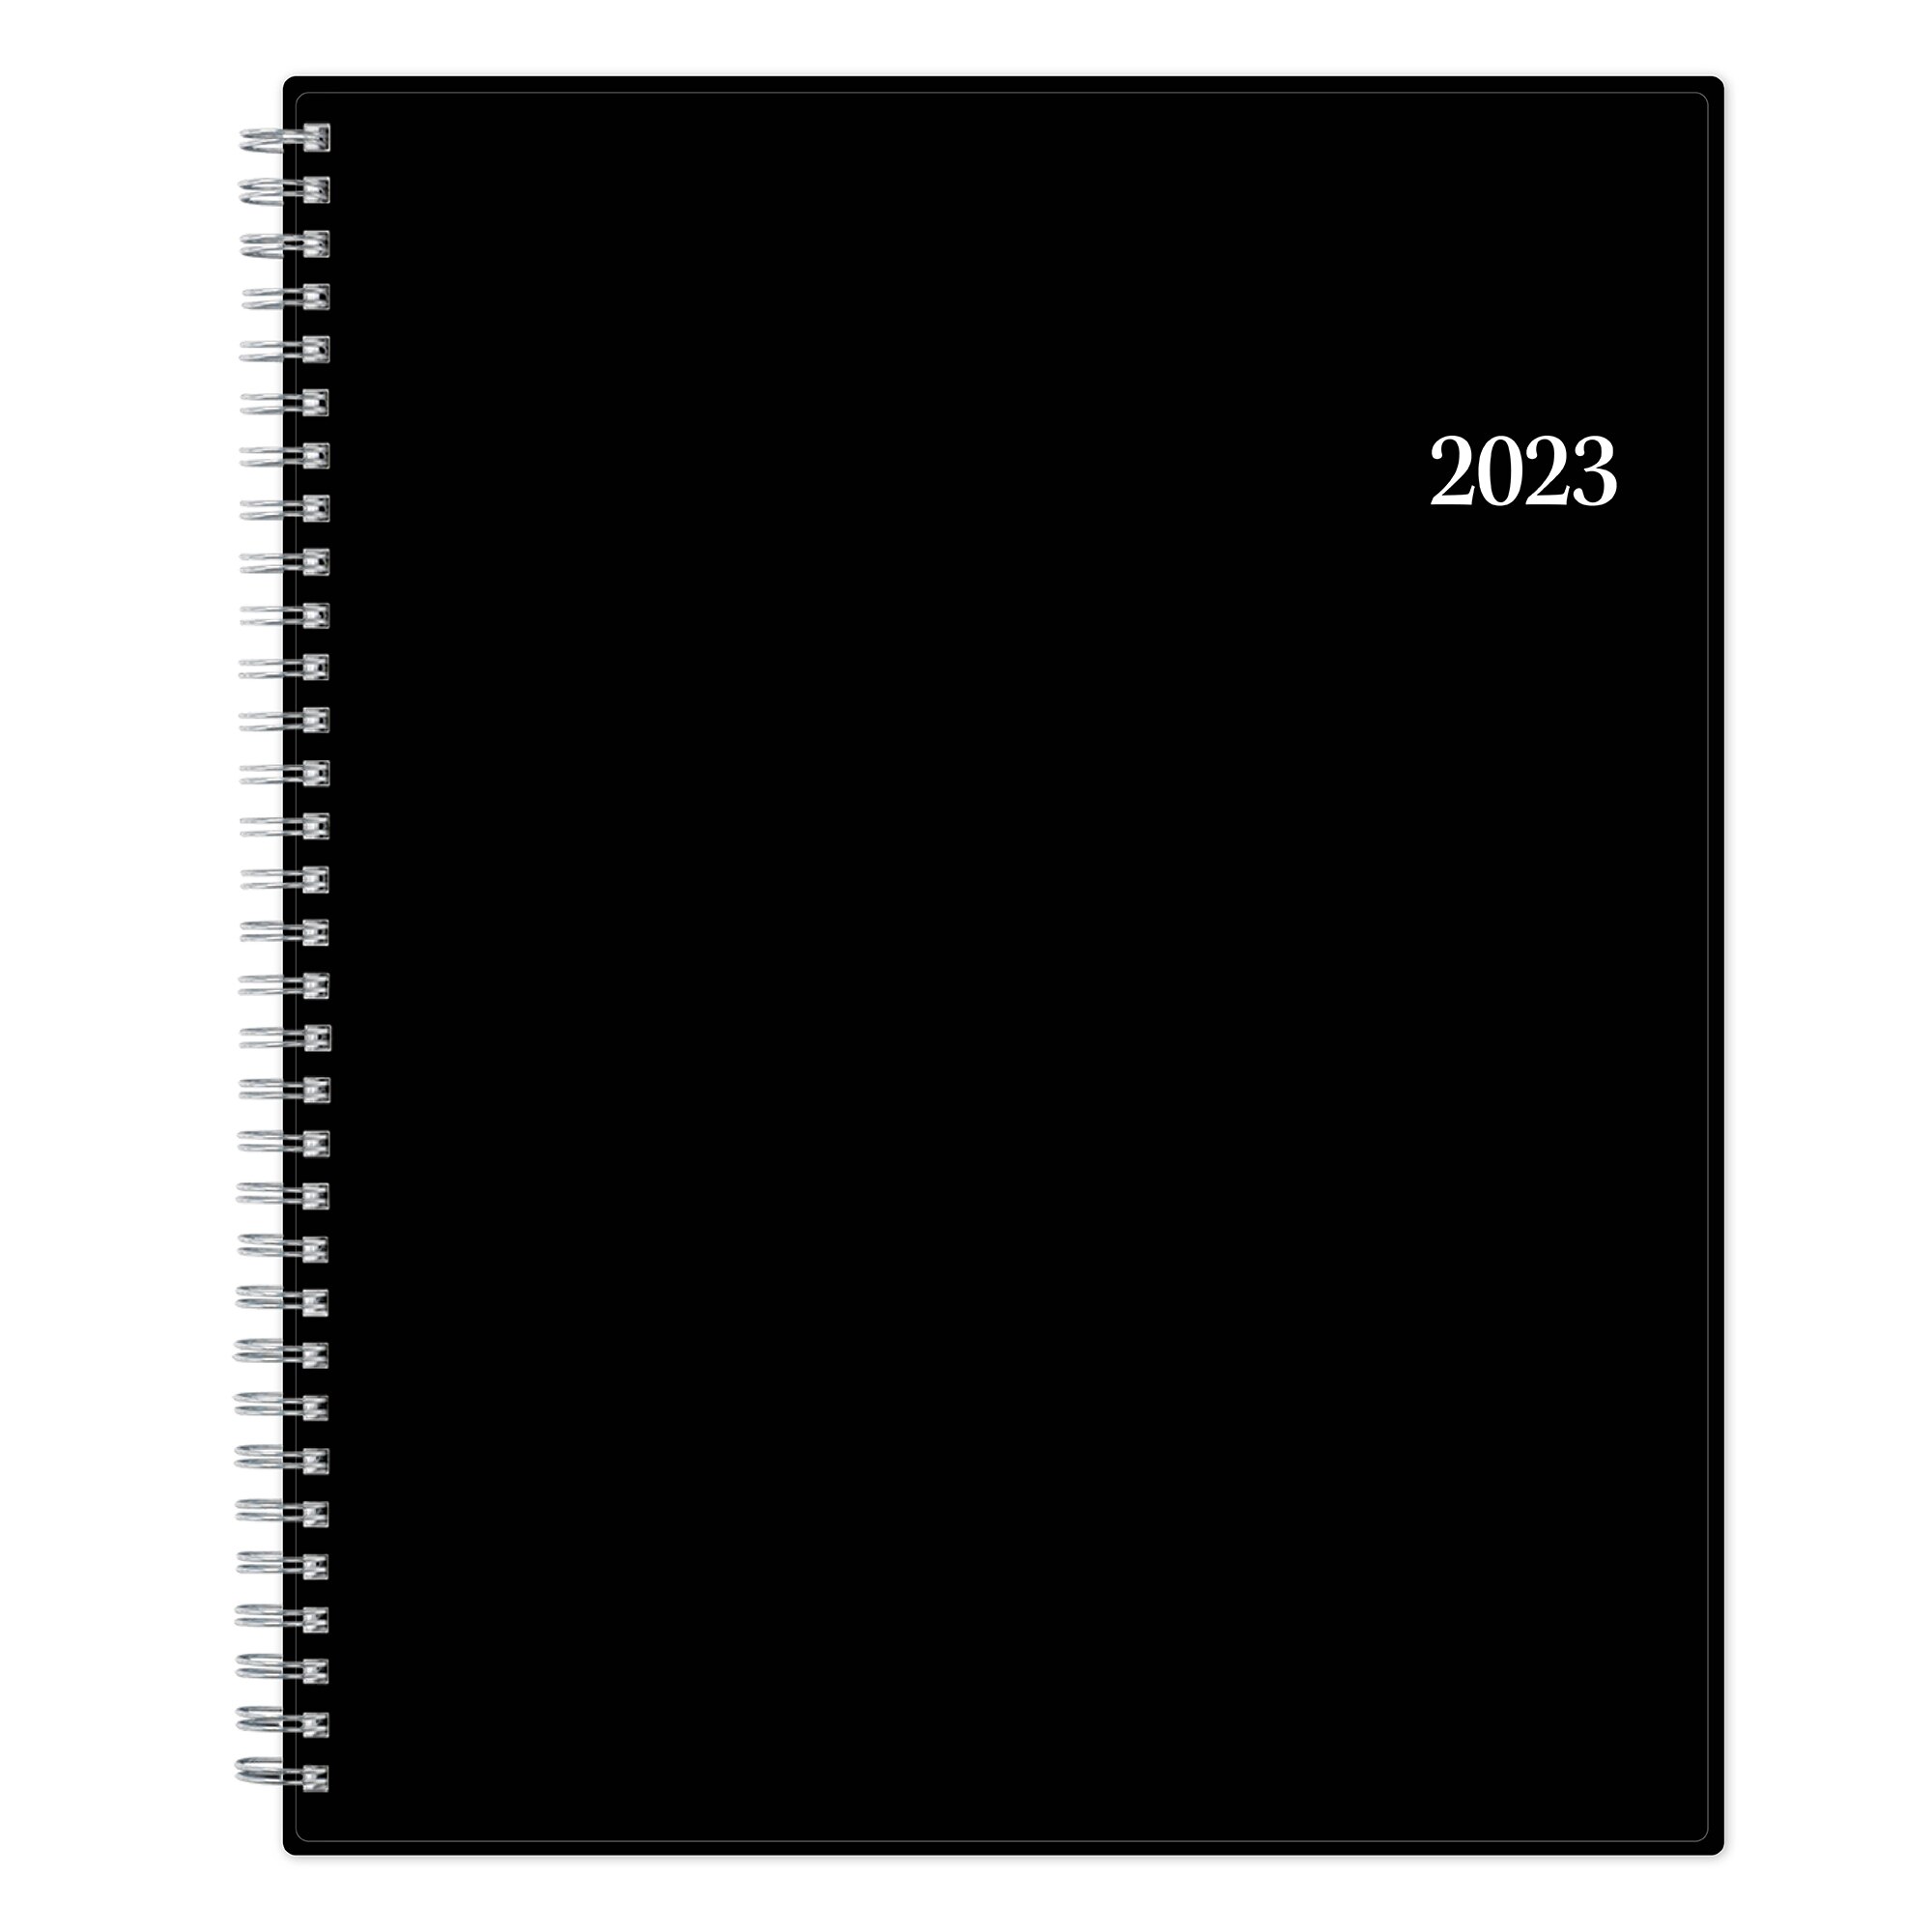 Blue Sky 2023 Tabbed Weekly and Monthly Planner, 8.5 in. x 11 in., Enterprise